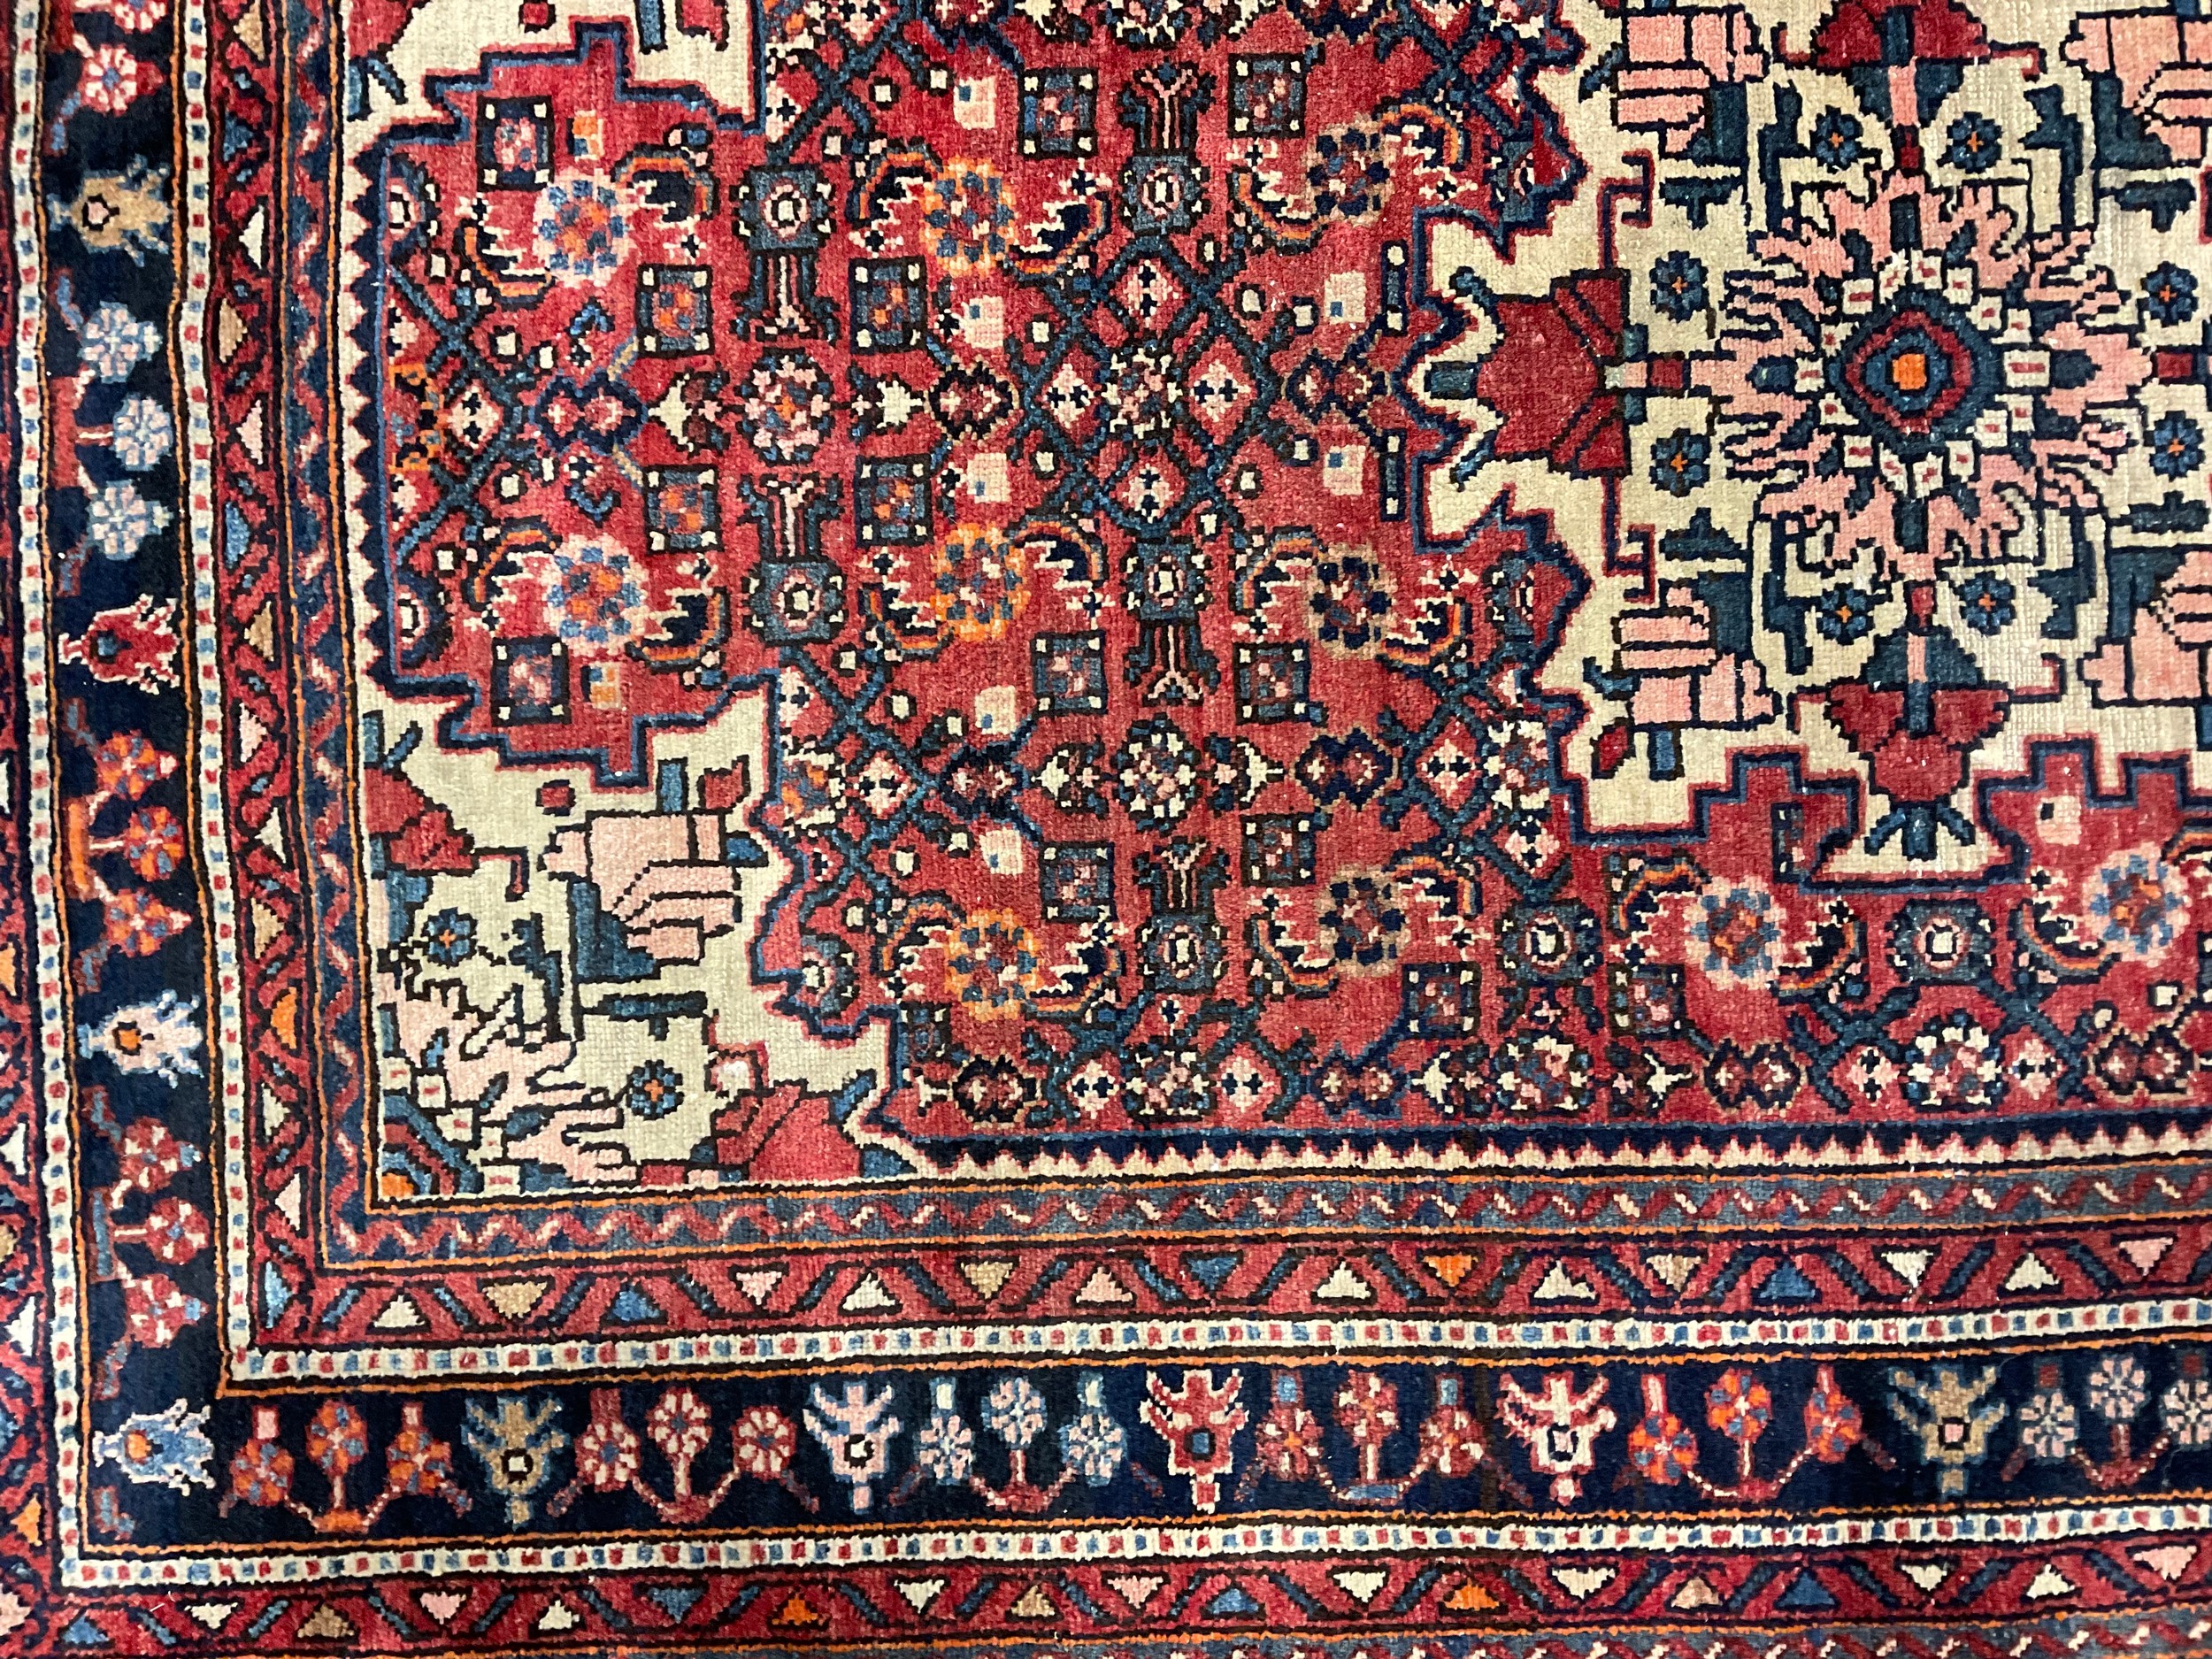 Middle East and the Orient - a Persian design Karadja type wool rug or carpet, 210cm x 133cm - Image 2 of 2